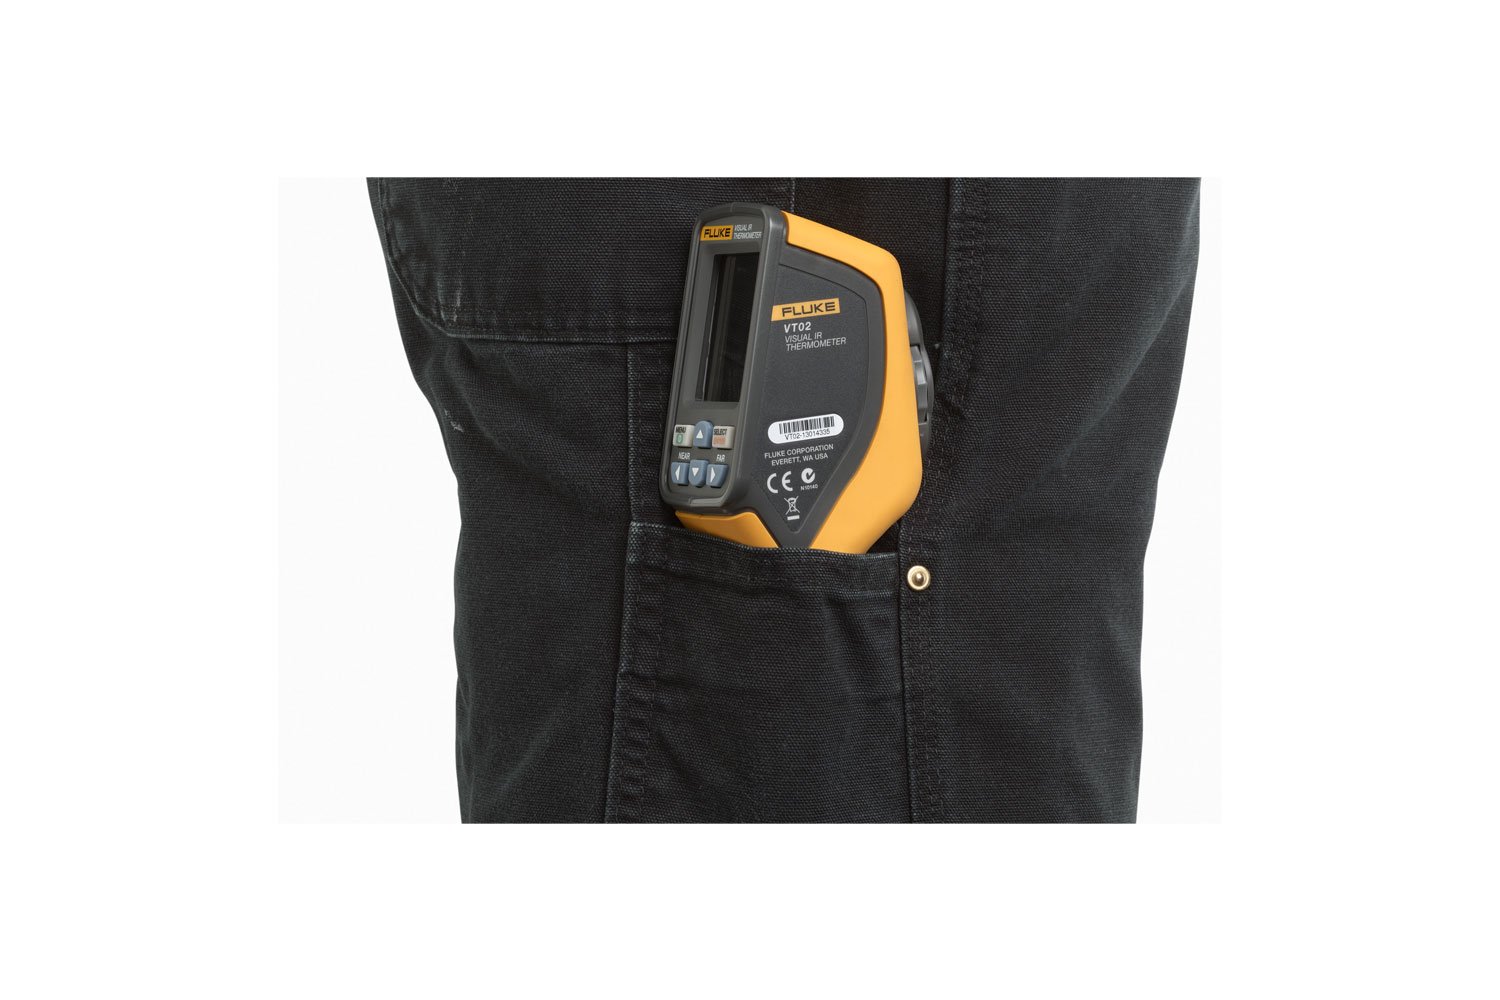 Fluke VT04 Imaging Infrared Thermometer with Rechargeable